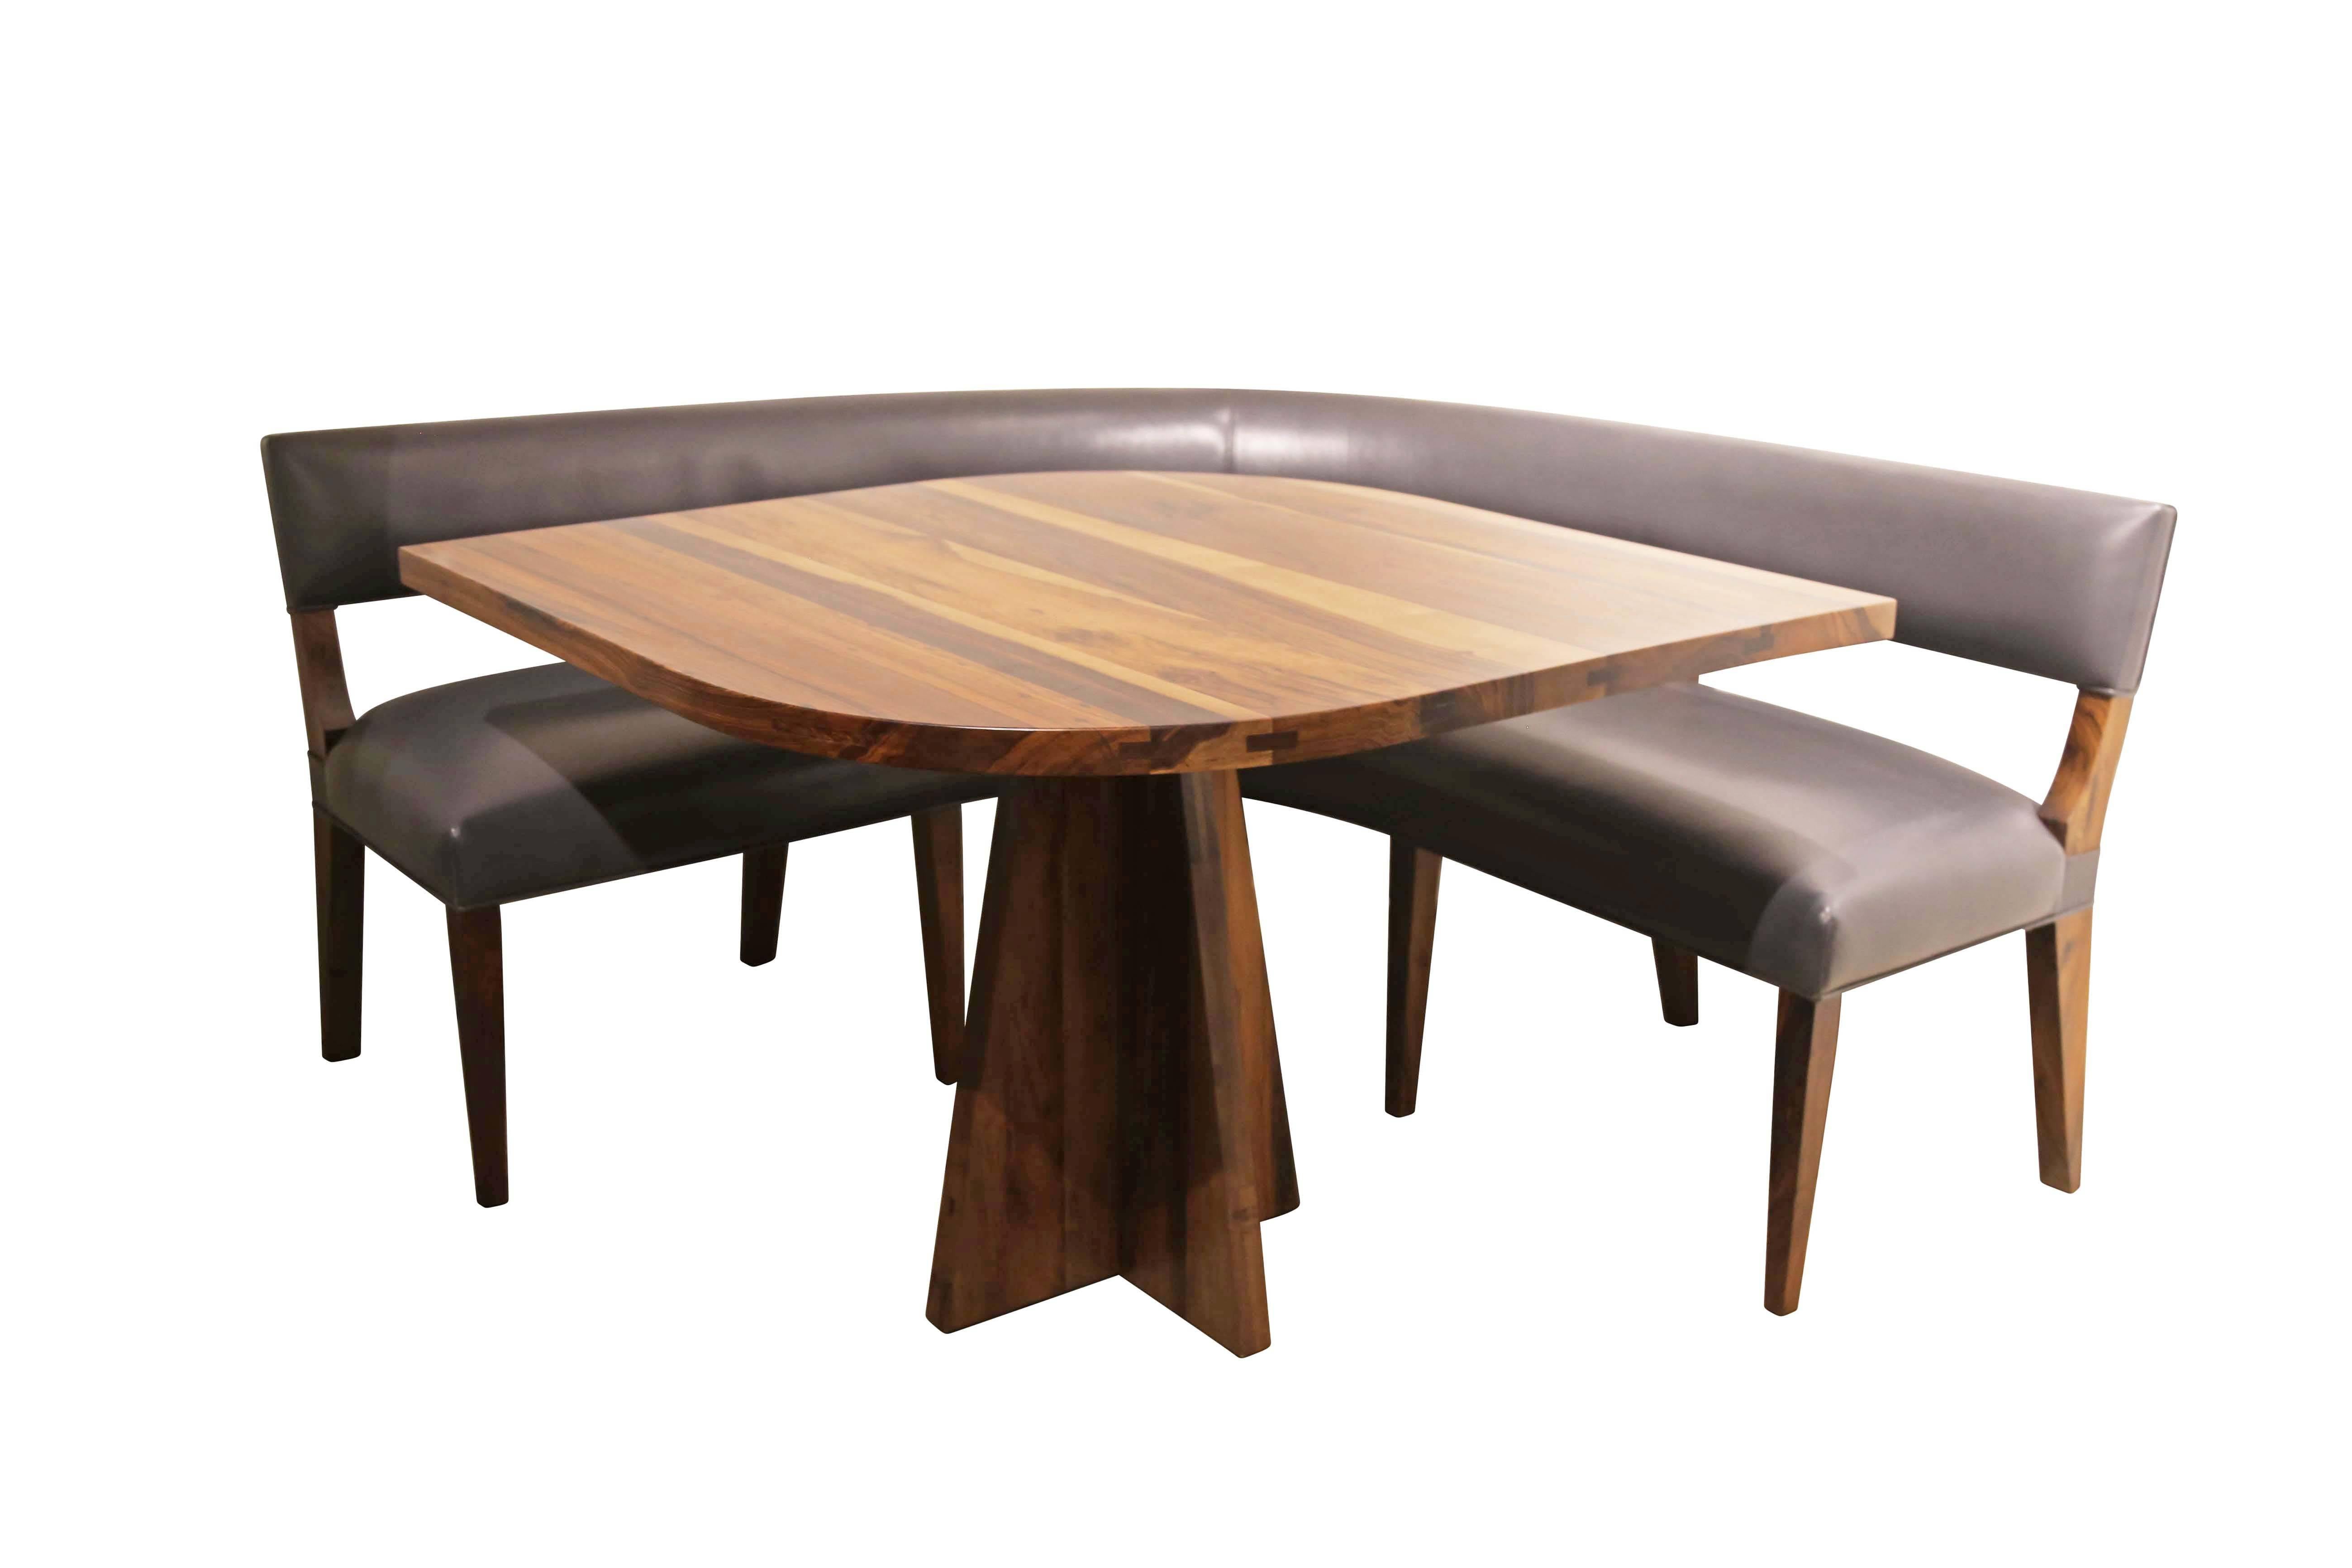 The Luca Table is one of Costantini’s signature and most specified pieces. This teardrop top makes it a perfect counterpart for a booth like our Bruno model shown above. 

Shown in Argentine Rosewood, a species known for its hardness as well as its